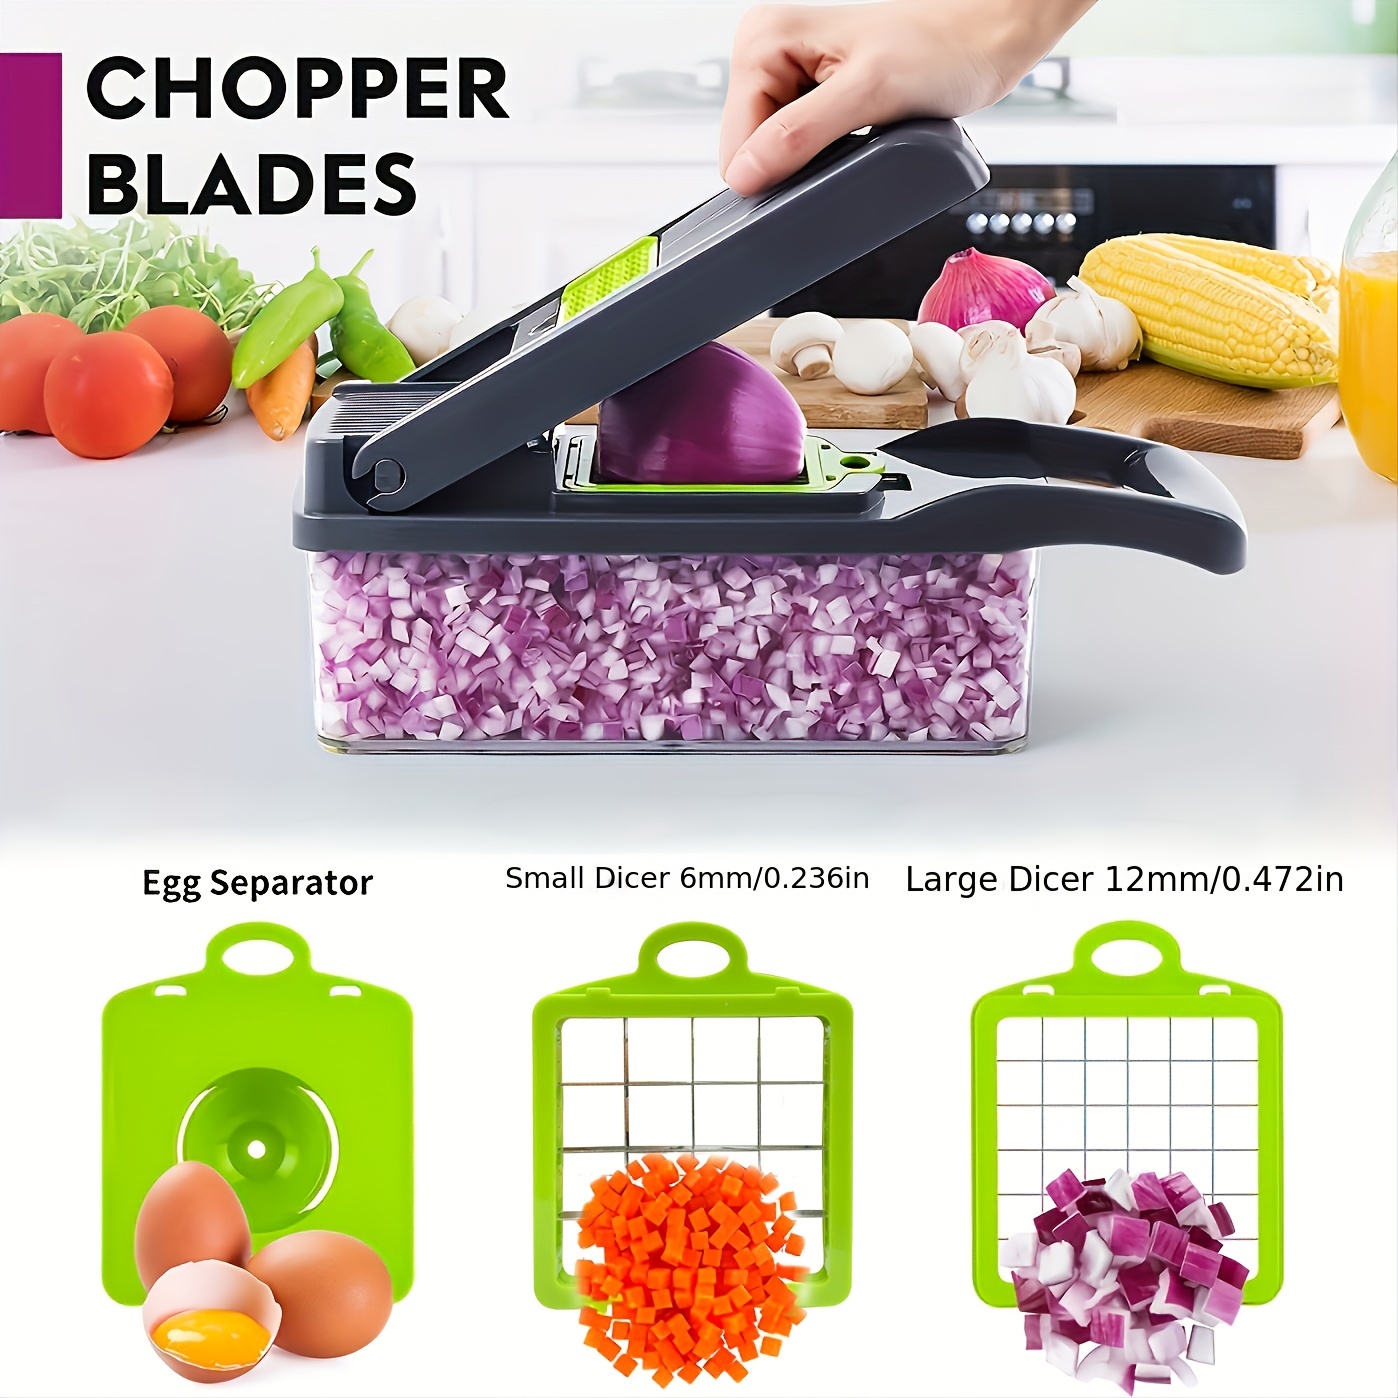 Vegetable Chopper Durable Healthy Easy to Clean Dishwasher Safe